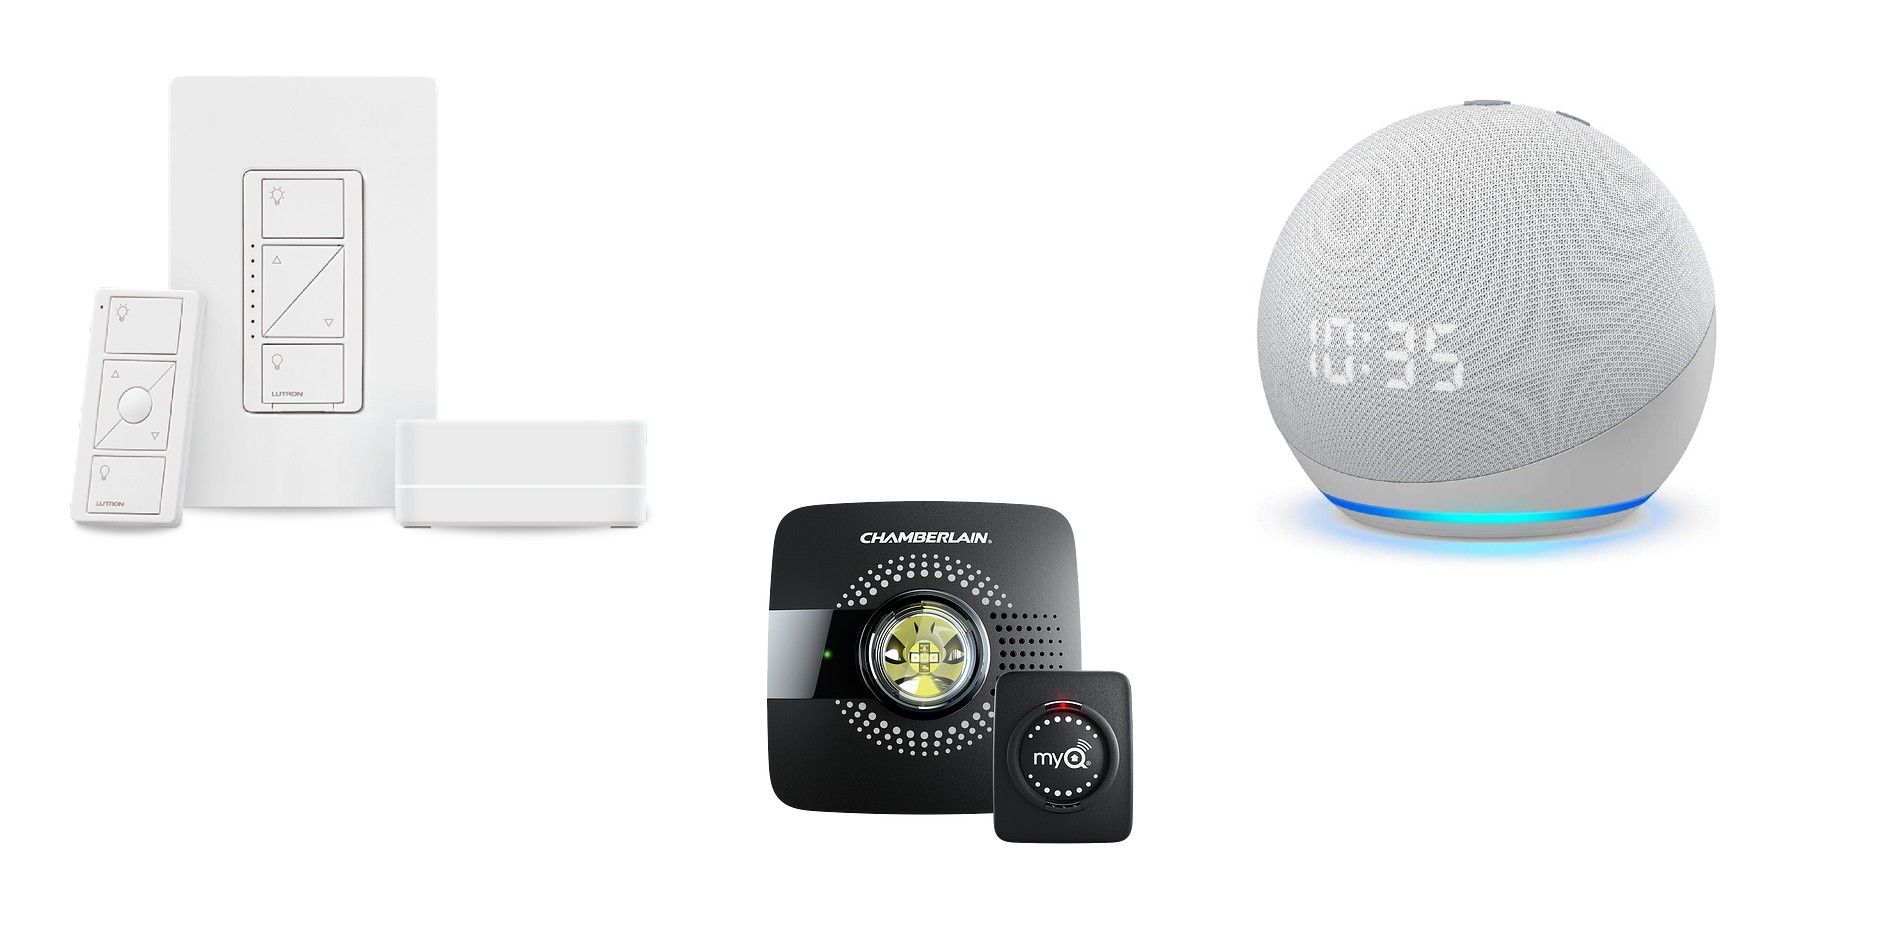 Some smart home devices